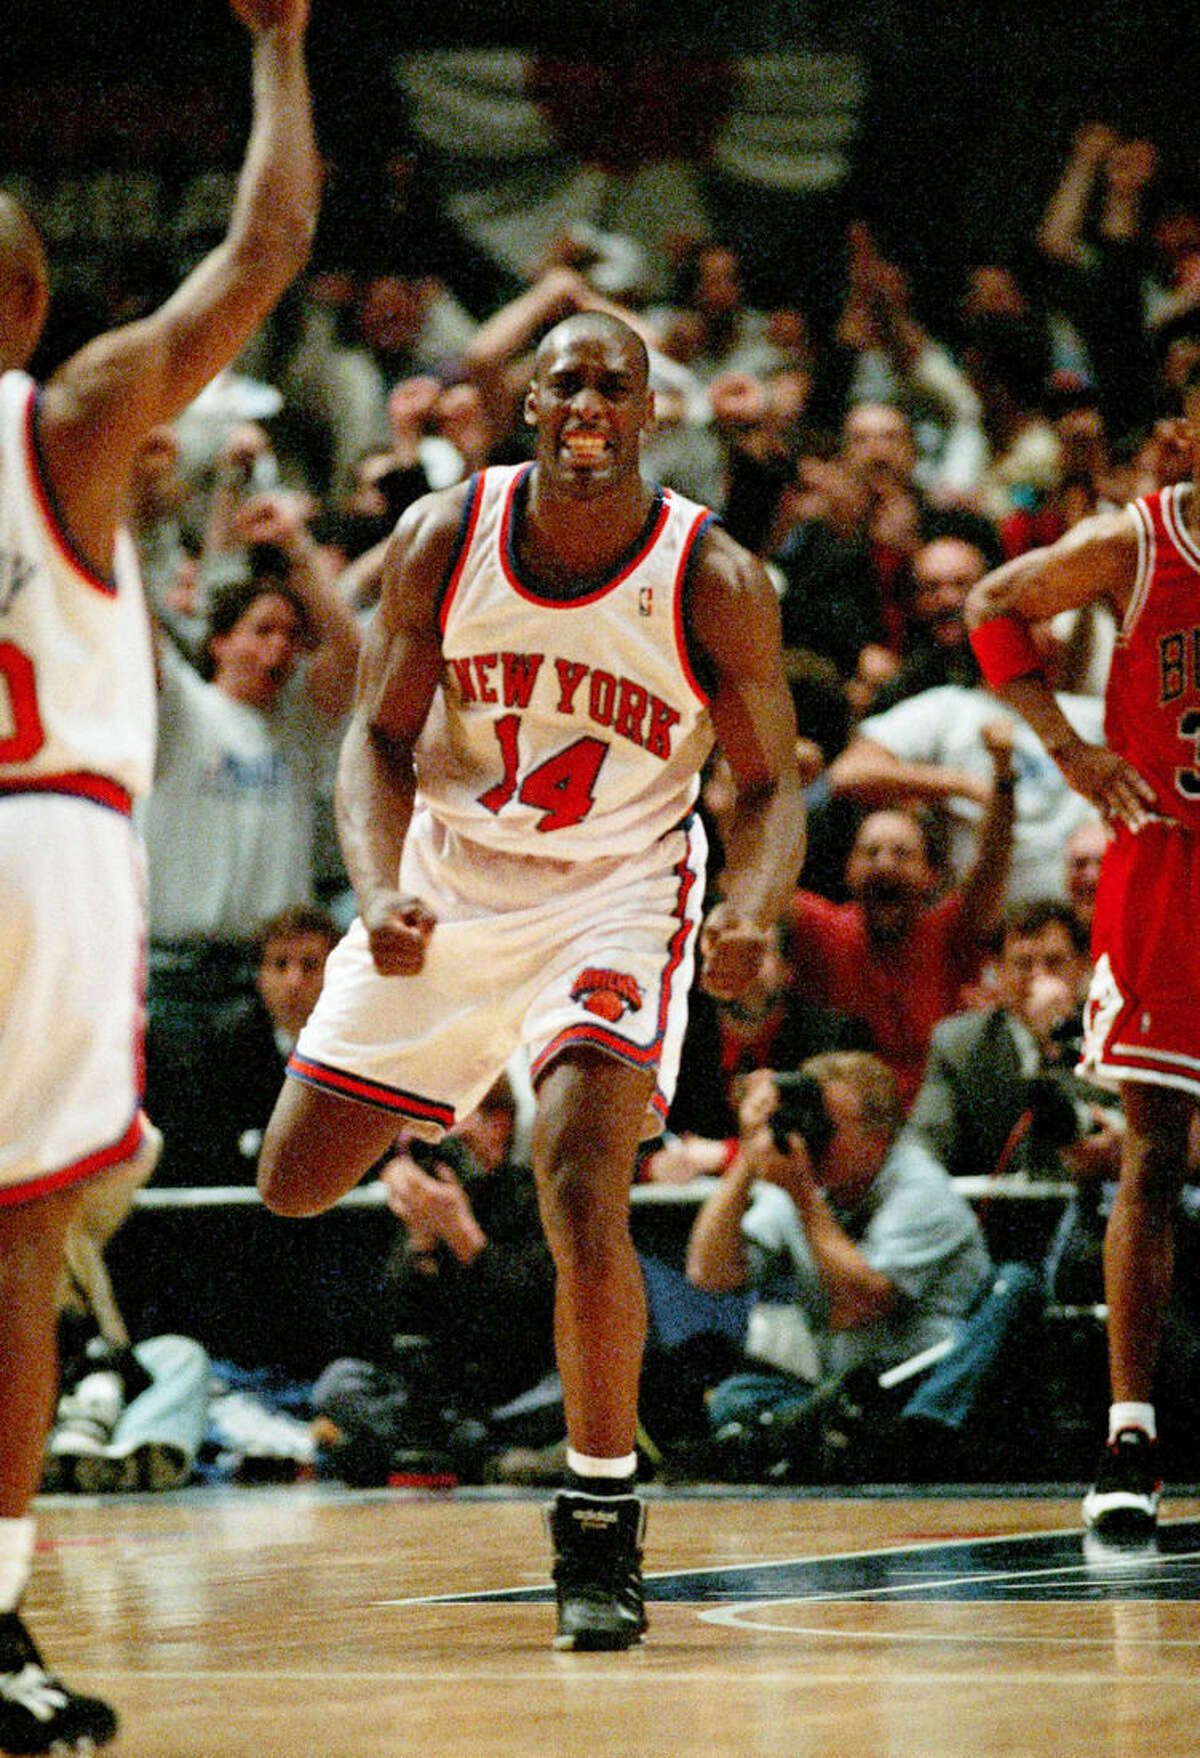 FILE - In this May 8, 1994 file photo, New York Knicks Anthony Mason (14) celebrates as the Knicks pull within one point of the Chicago Bulls during the fourth period of the NBA Eastern Conference Semifinal game in New York. The New York Knicks spokesman Jonathan Supranowitz confirmed Saturday, Feb. 28, 2015 that Mason, a rugged power forward who was a defensive force for several NBA teams in the 1990s, has died. He was 48. (AP Photo/Bill Kostroun)